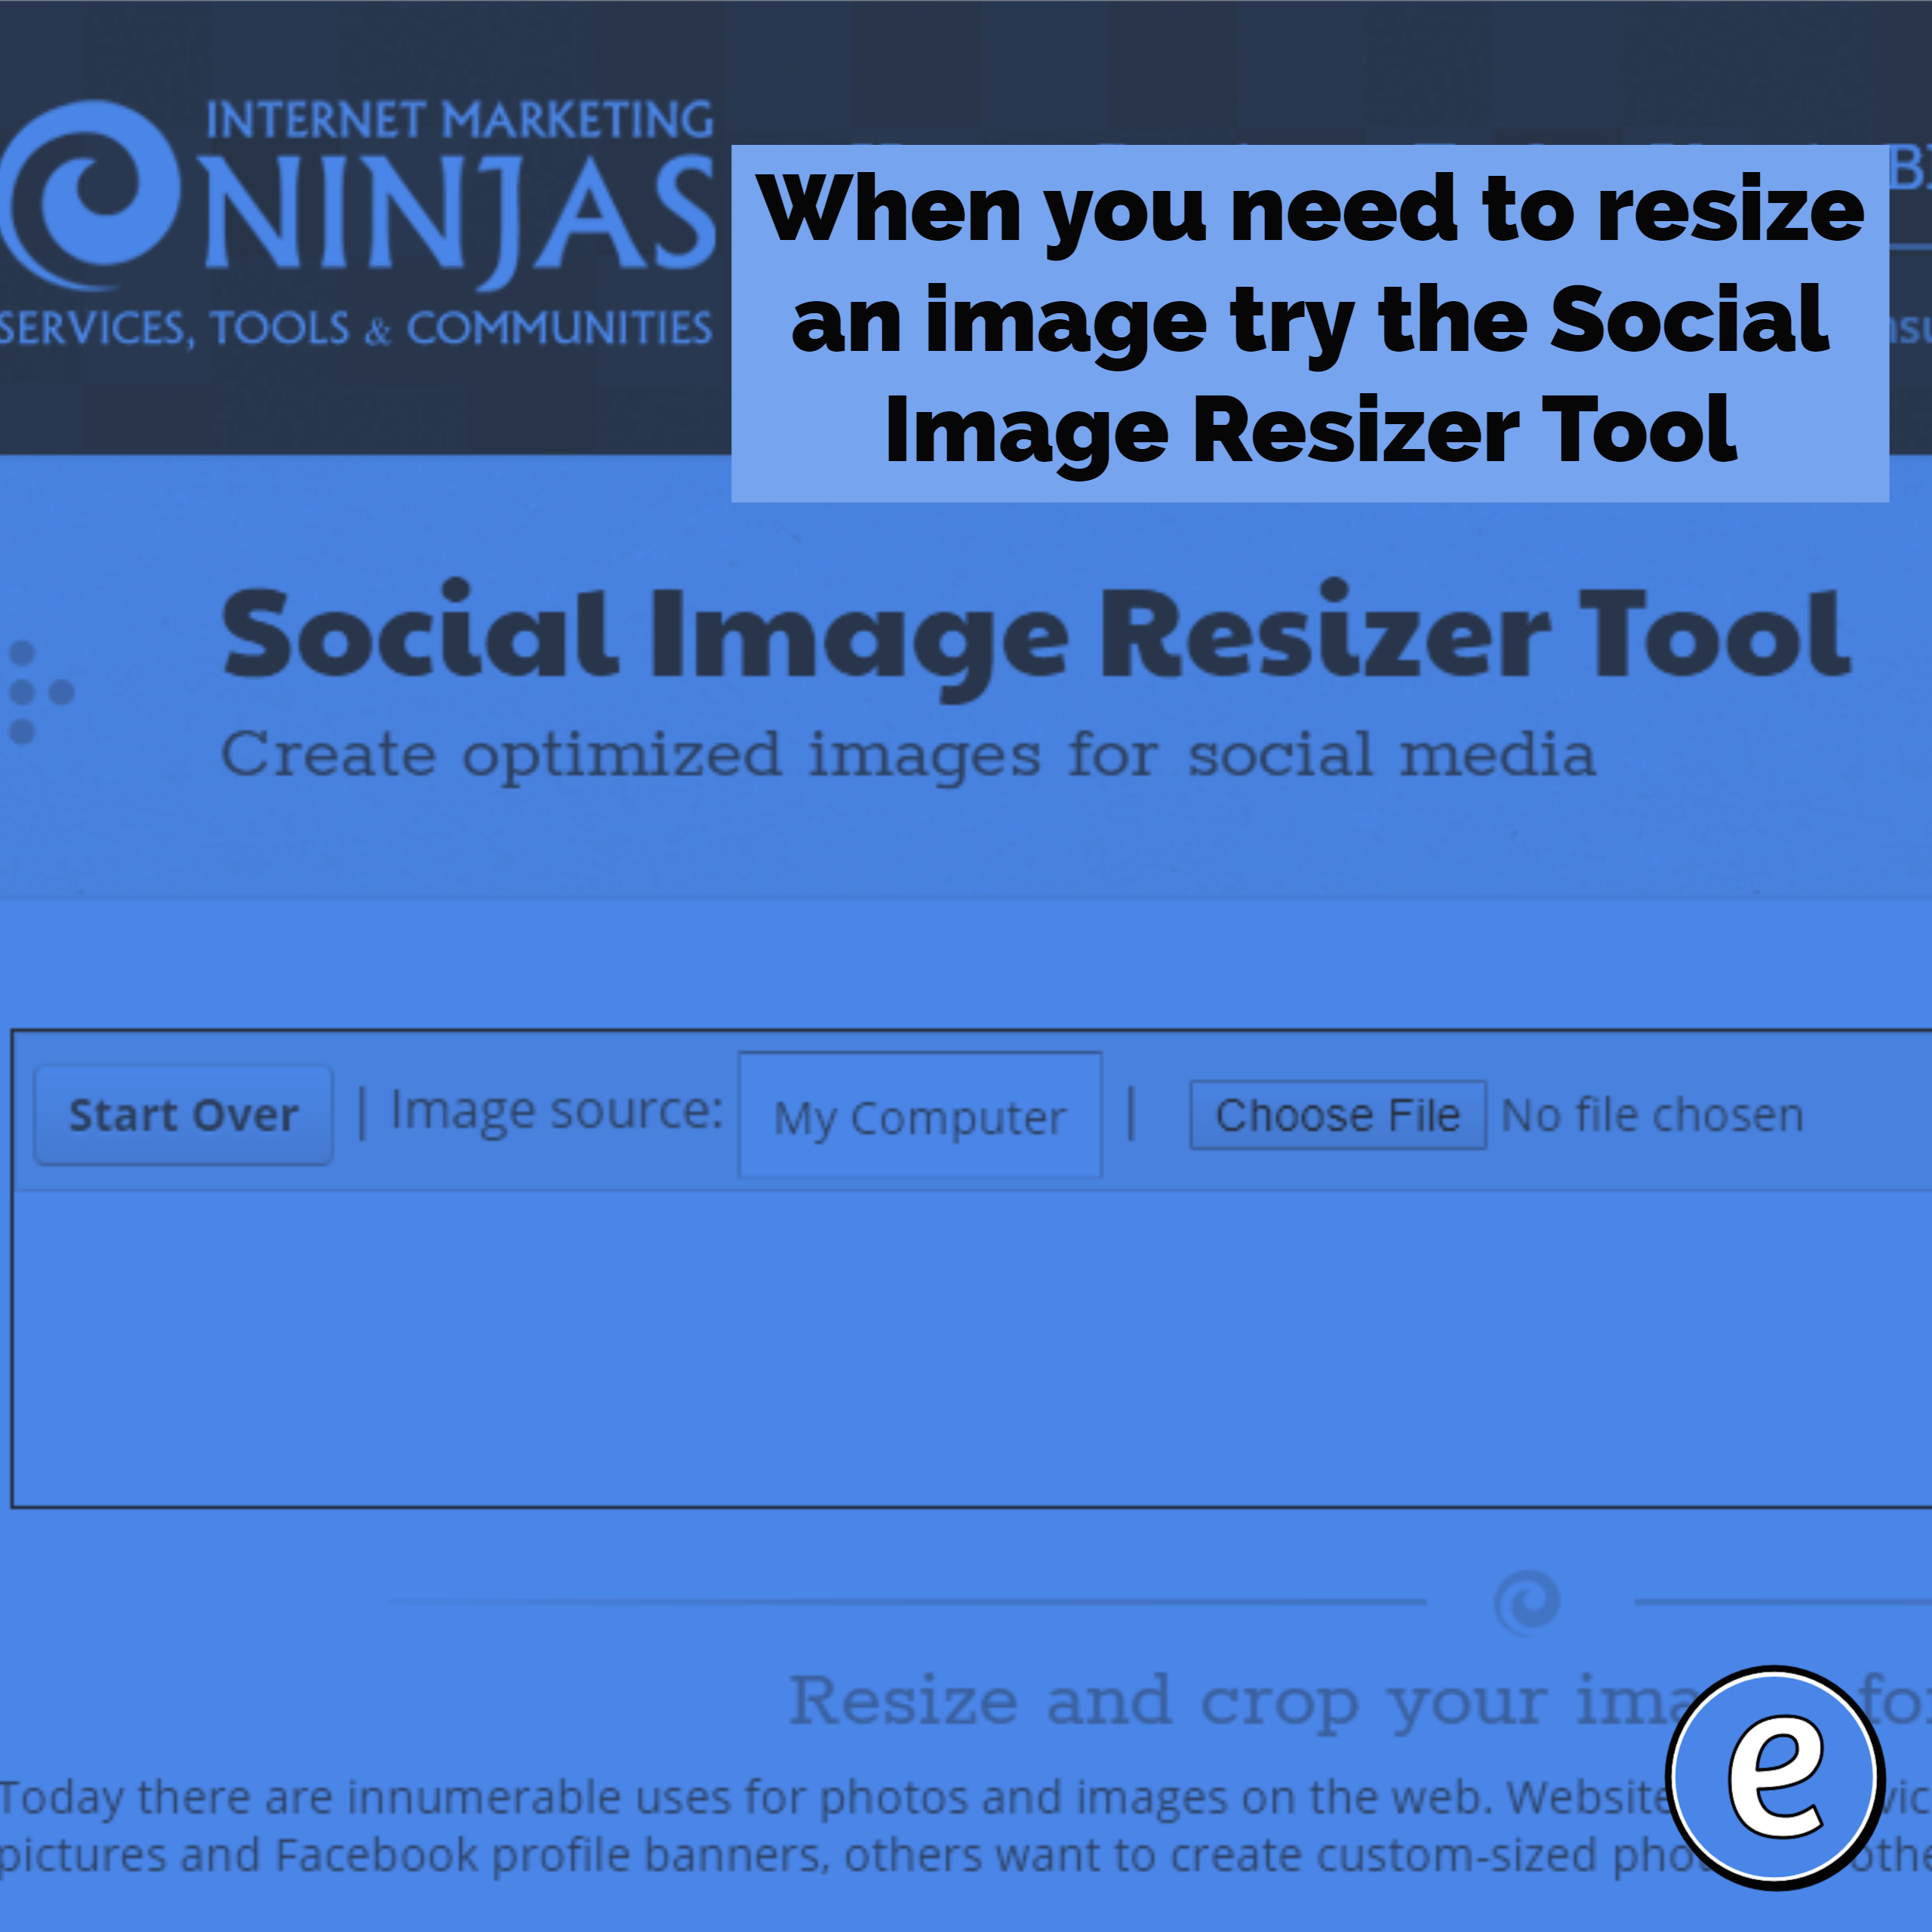 When you need to resize an image try the Social Image Resizer Tool